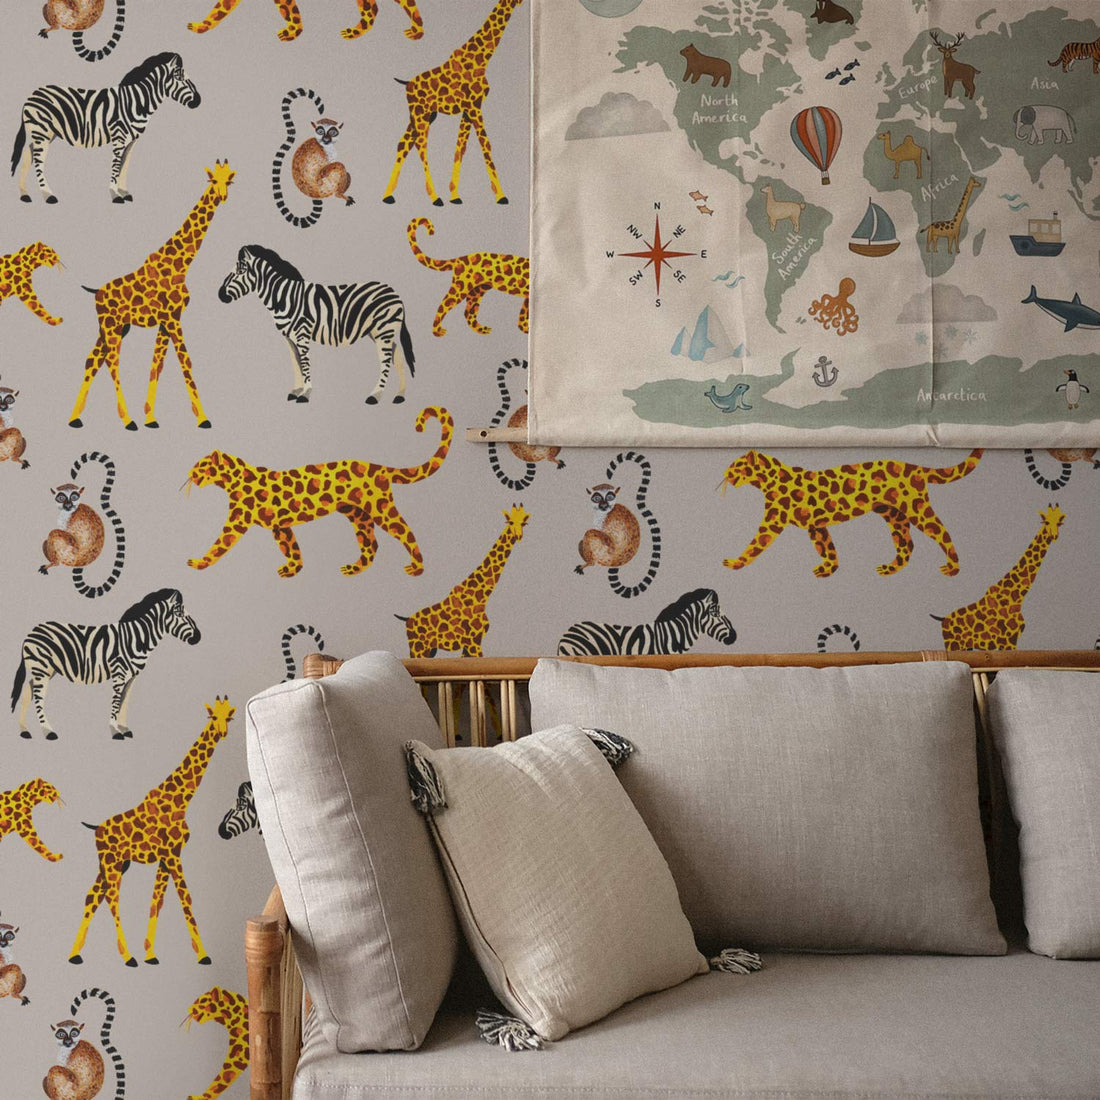 kids room interior with african decoration on walls